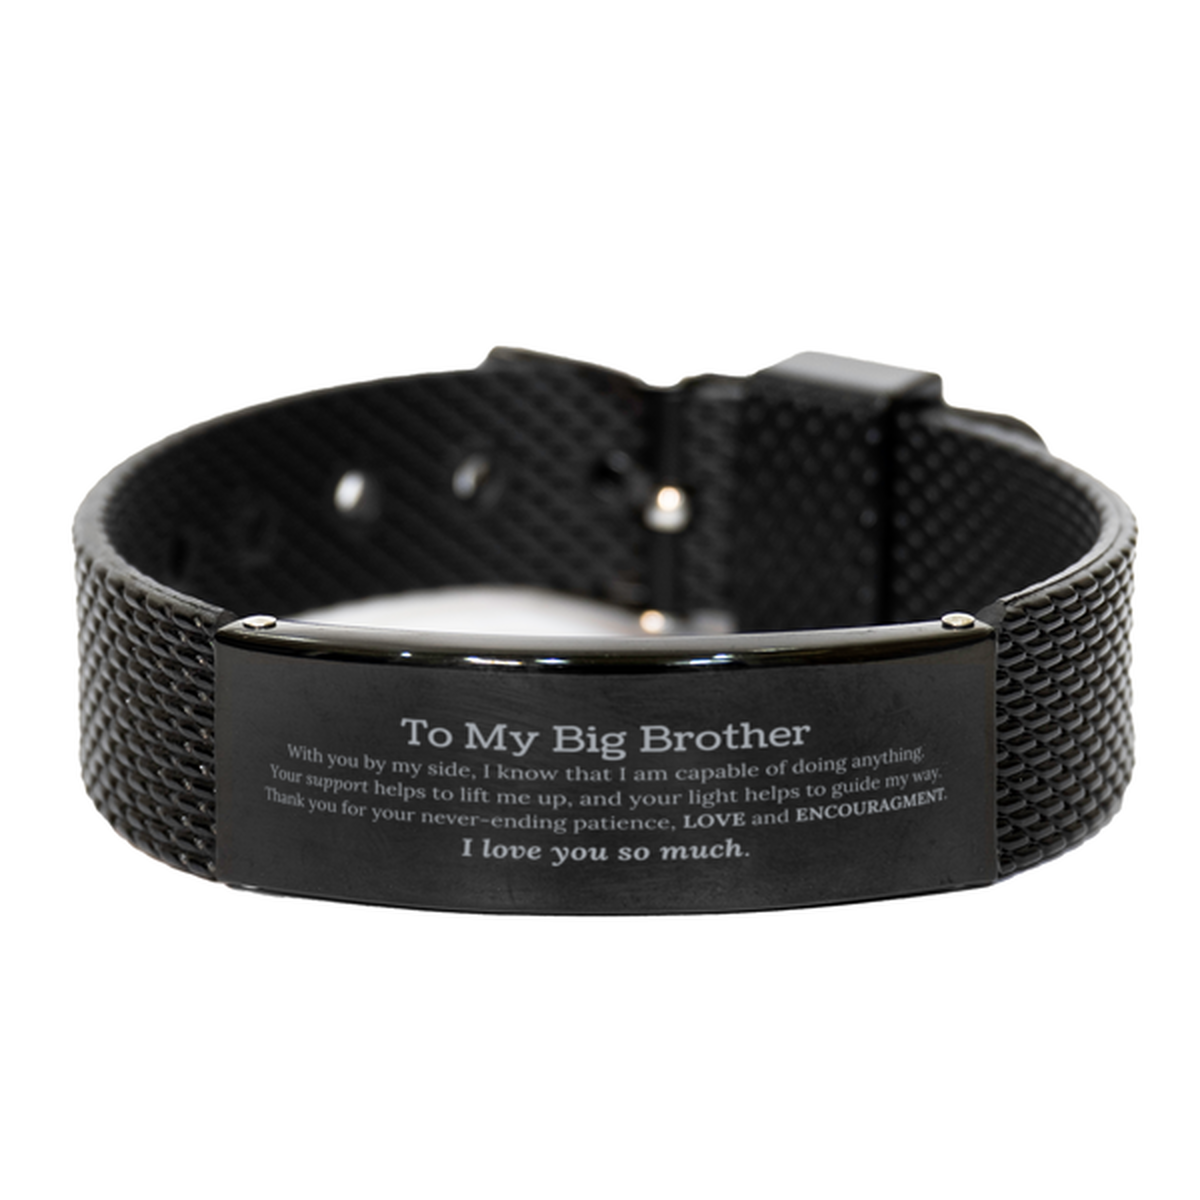 Appreciation Big Brother Black Shark Mesh Bracelet Gifts, To My Big Brother Birthday Christmas Wedding Keepsake Gifts for Big Brother With you by my side, I know that I am capable of doing anything. I love you so much